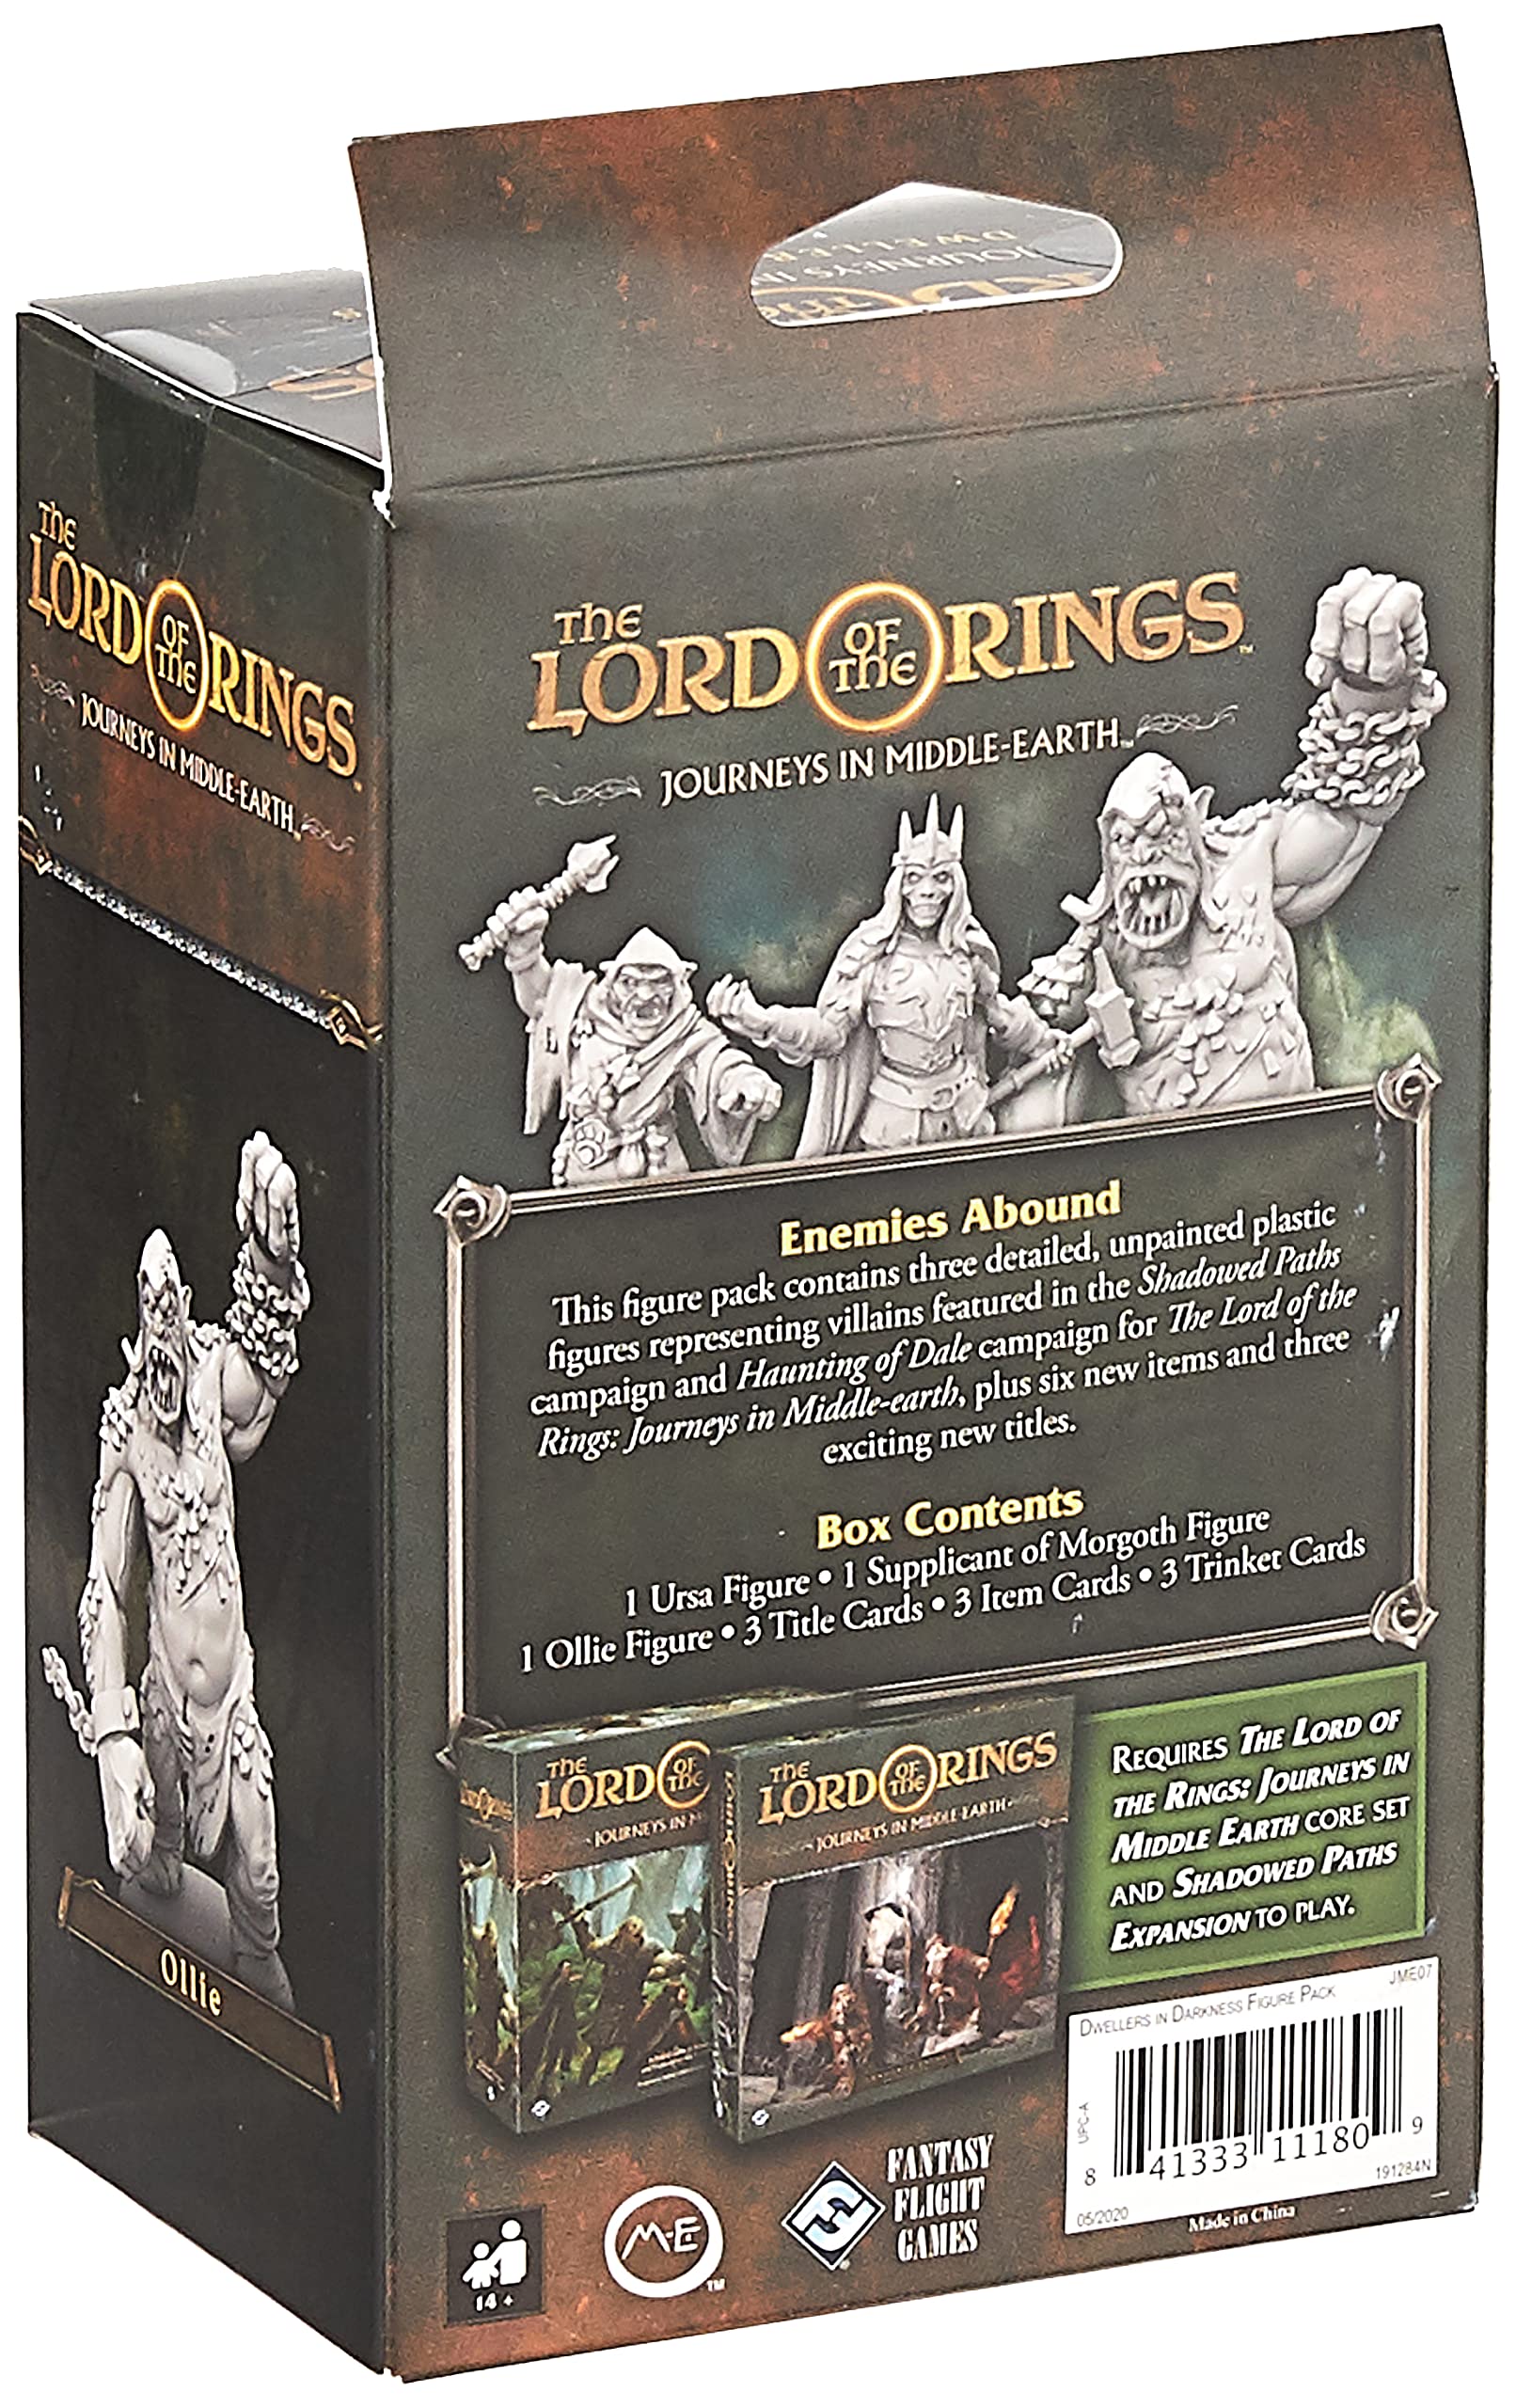 The Lord of the Rings Journeys in Middle-earth Dwellers in Darkness FIGURE PACK - Adventure Board Game for Kids and Adults, Ages 14+, 1-5 Players, 60+ Minute Playtime, Made by Fantasy Flight Games